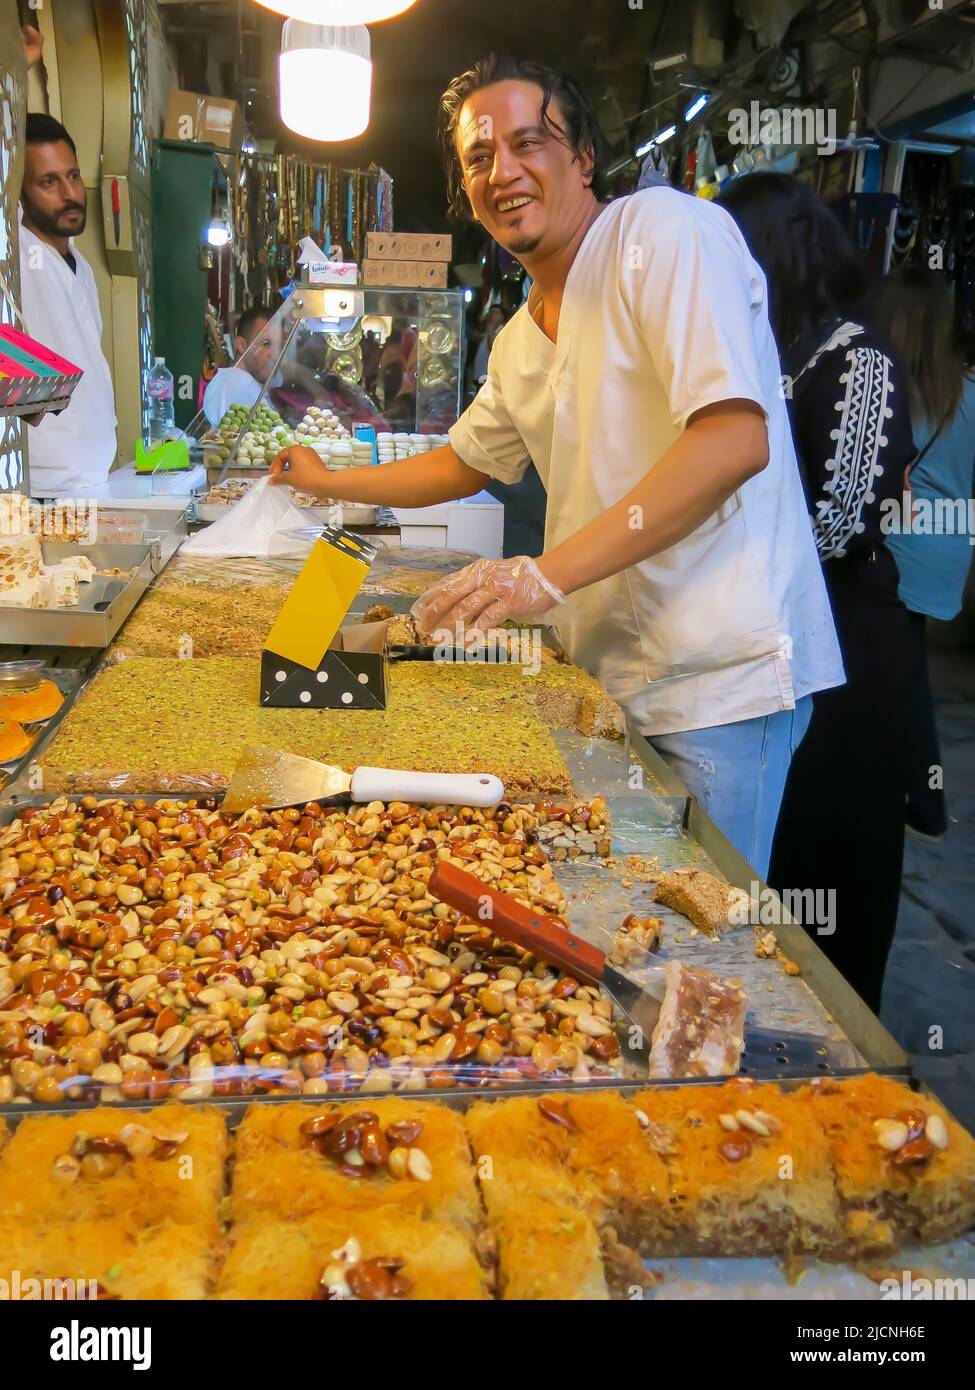 Candy / Confectionary Vendor Selling Sweets in the Medina Stock Photo